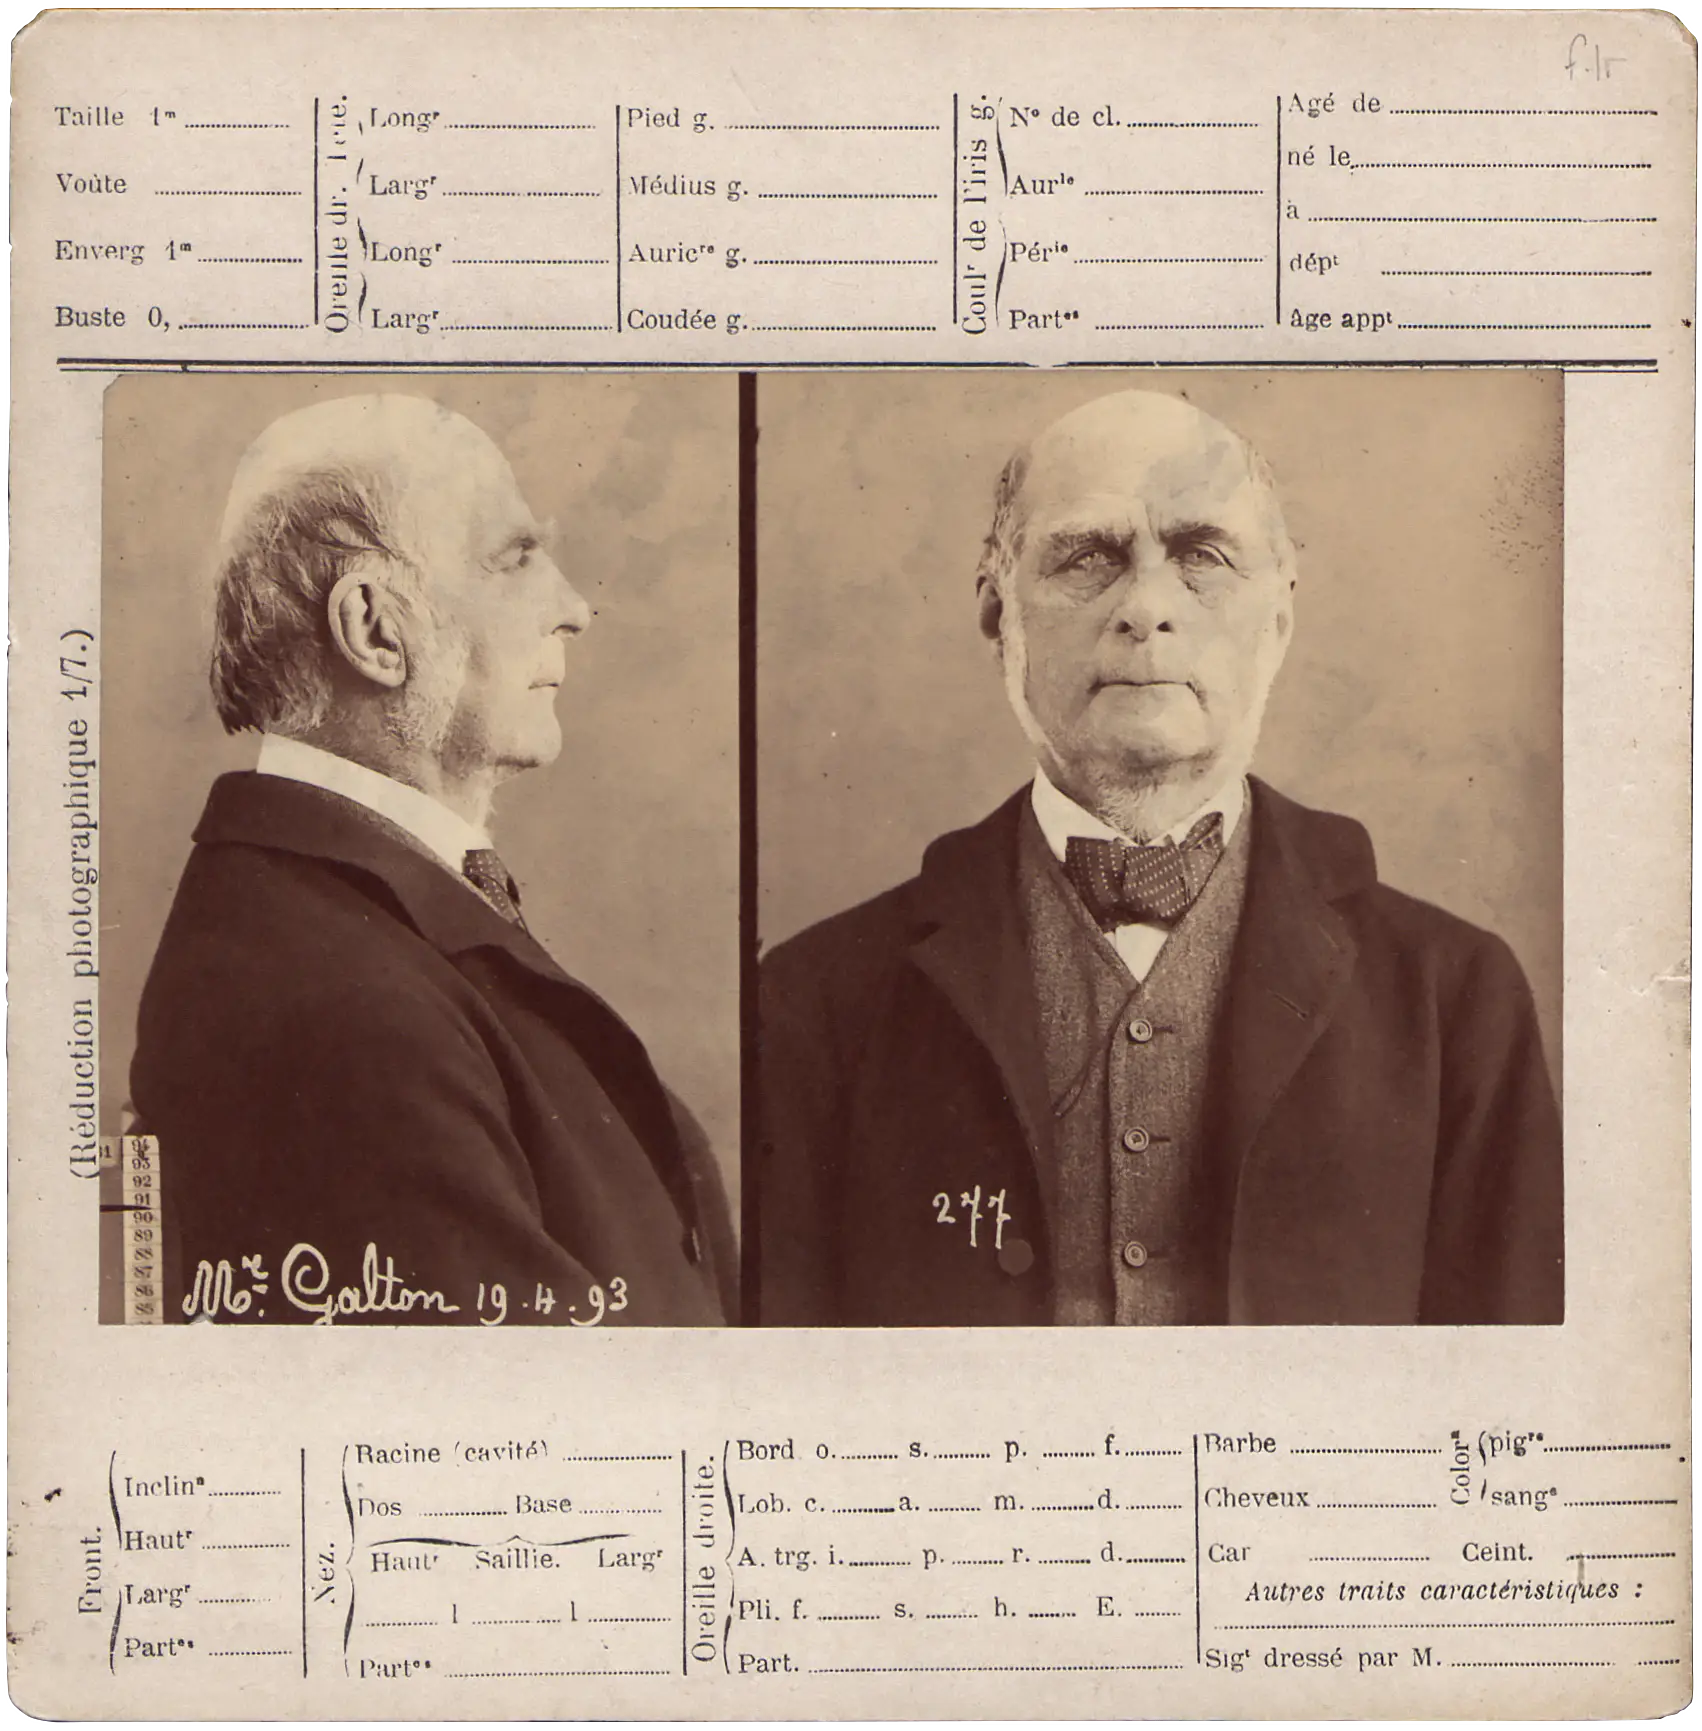 A card with empty lines for measurements to be entered. At the center of the card is a photograph of Francis Galton, taken from the side and the front, resembling a modern mugshot.